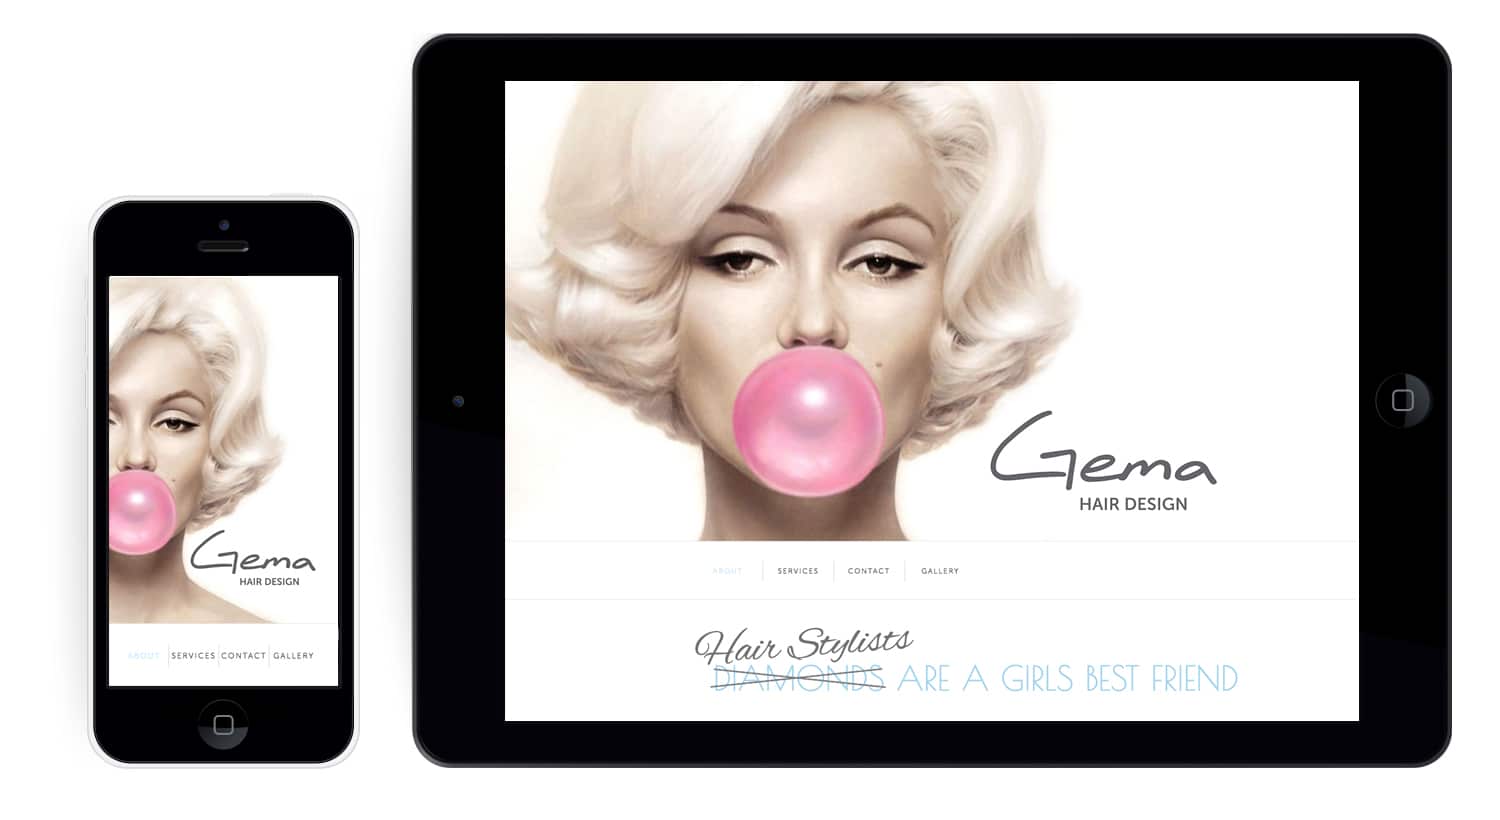 Gema hair design website tablet and phone layout